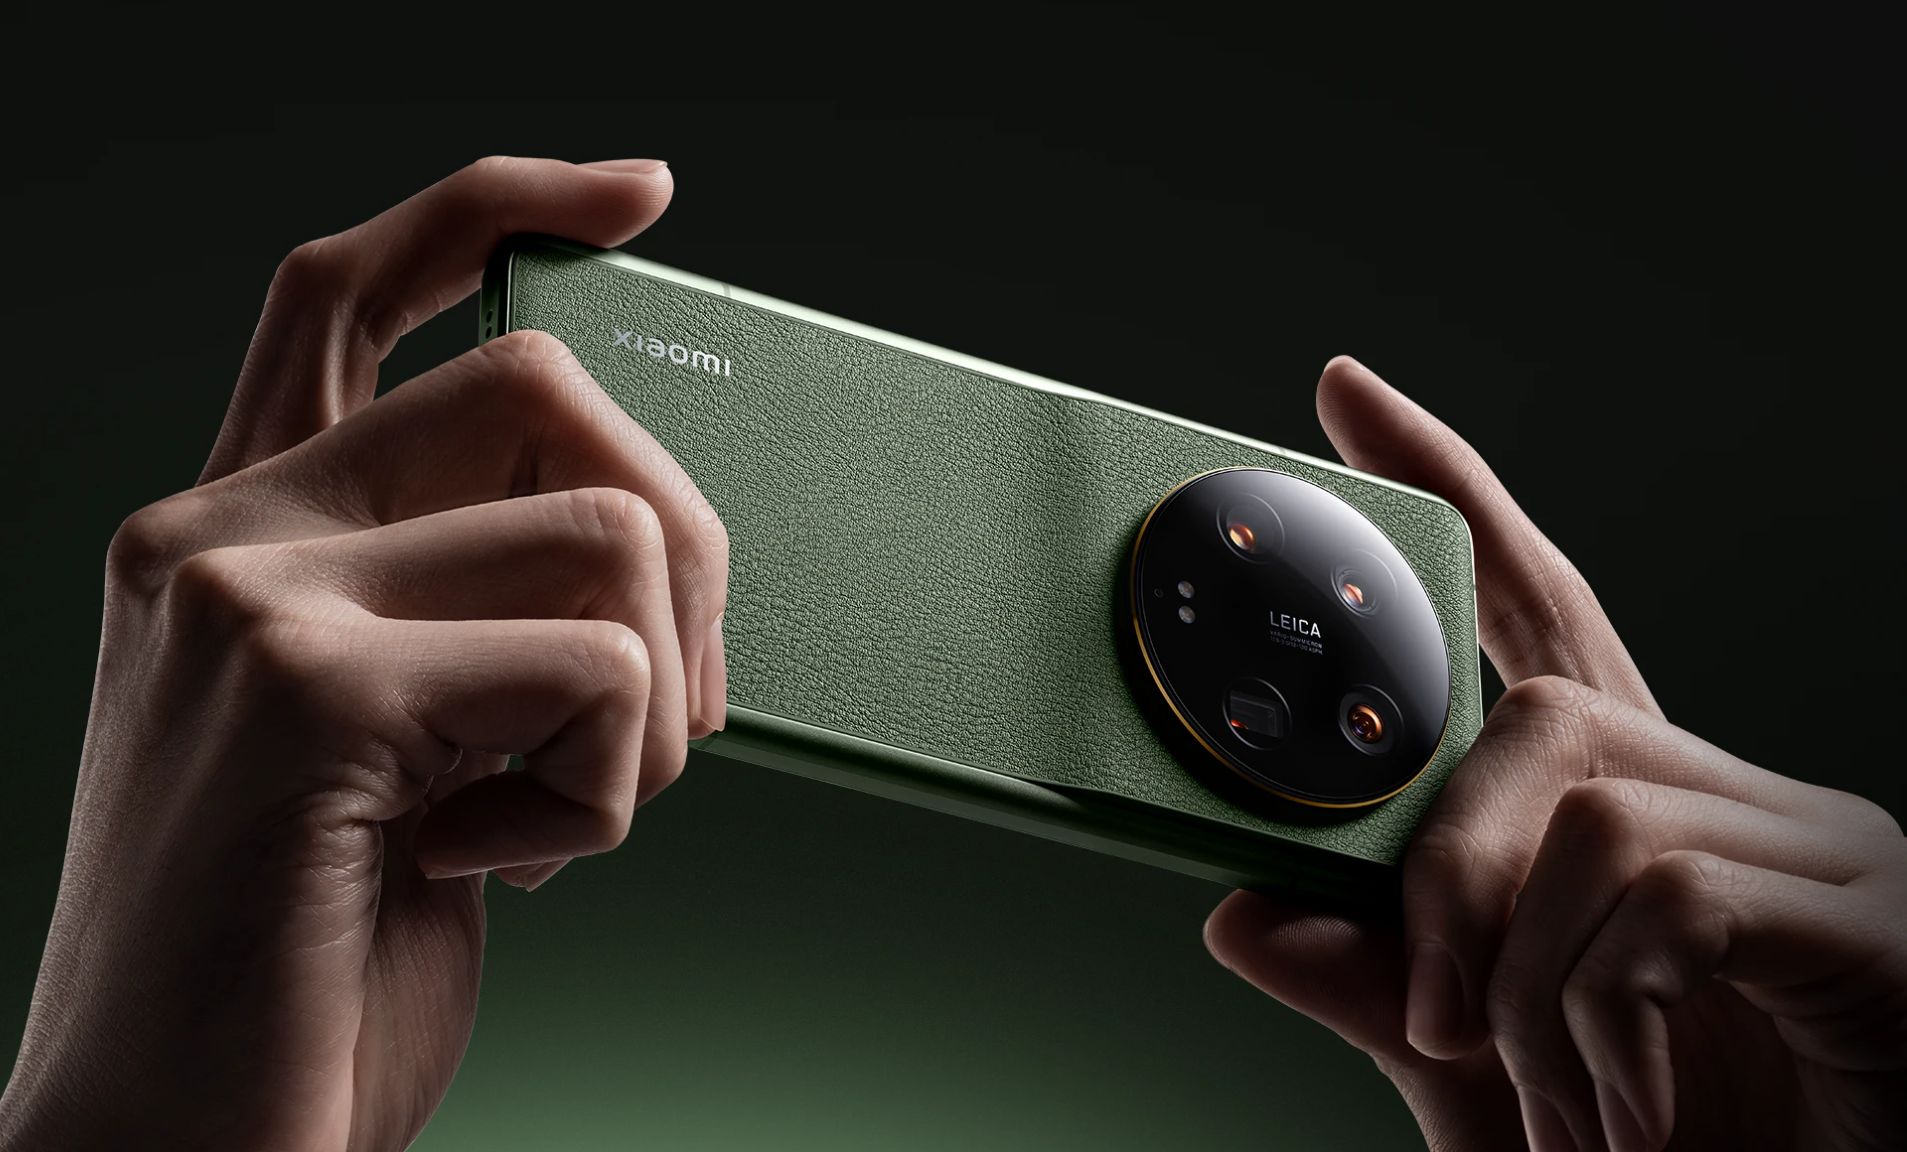 The Xiaomi 13 Ultra is launching soon, will come to global markets